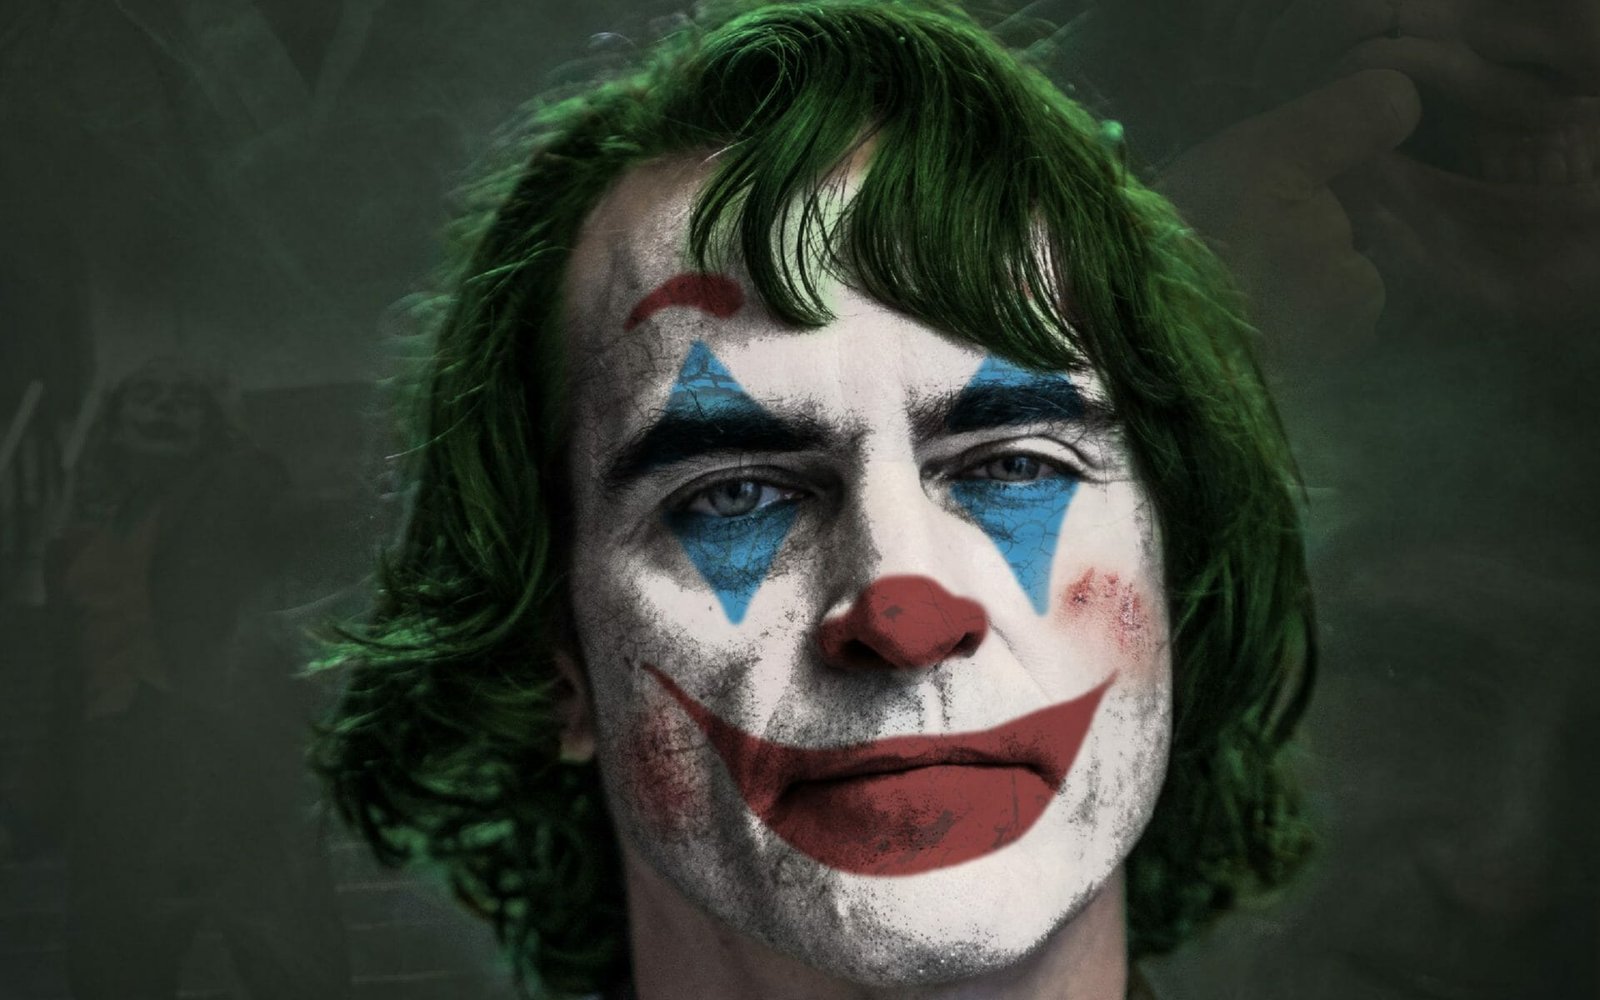 Best joker quotes 2019: I hope my death makes more cents than my life